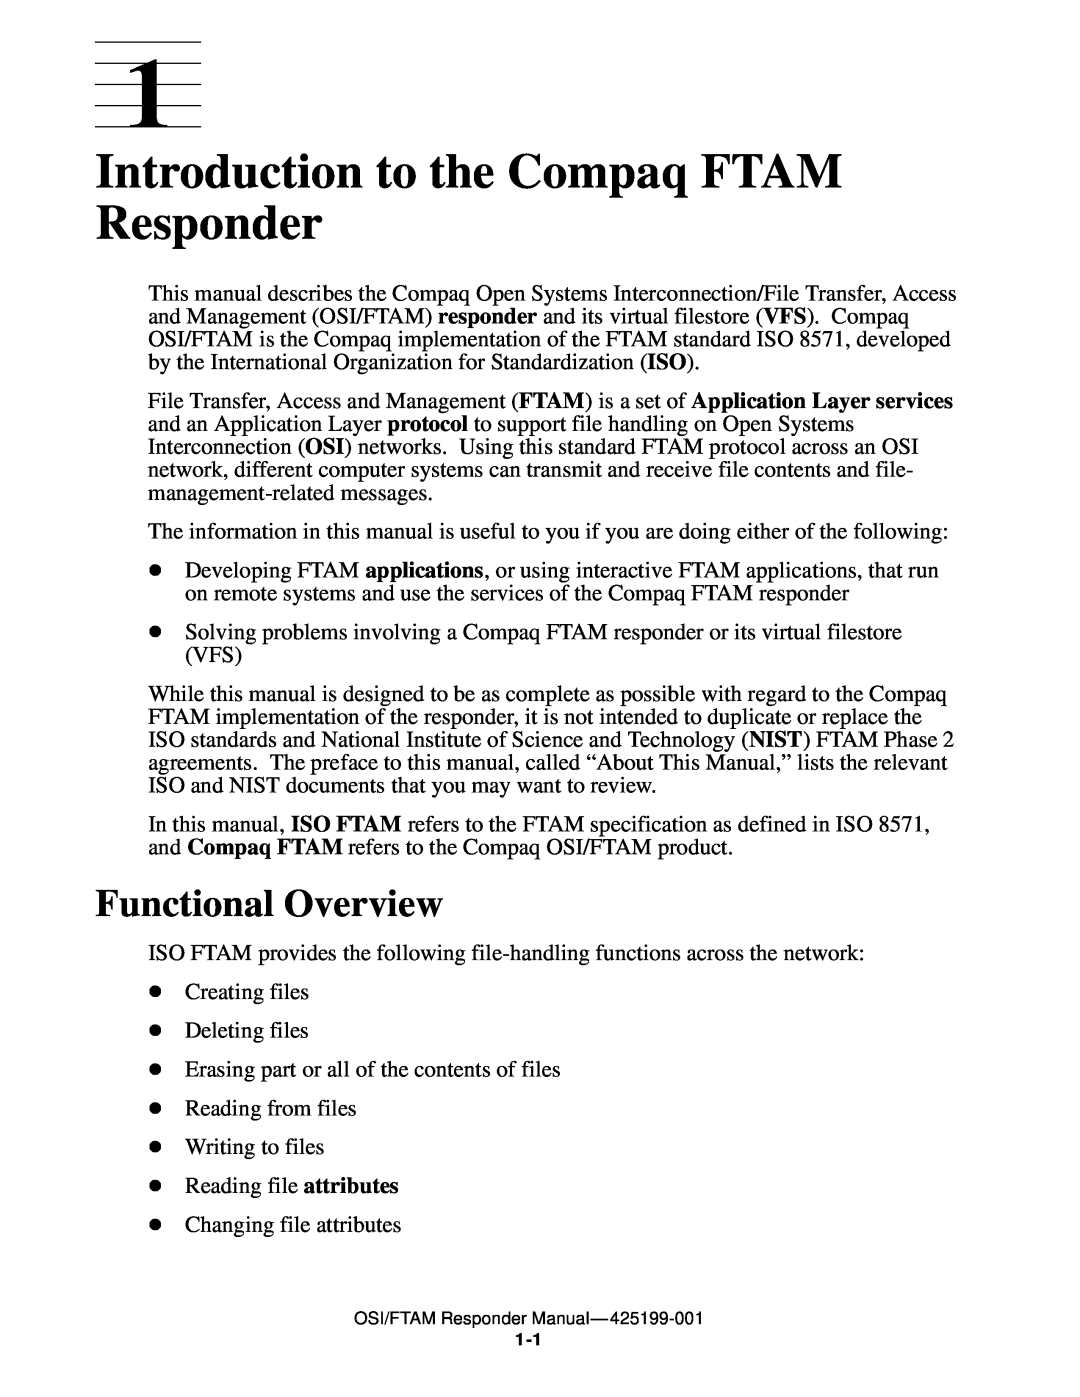 Compaq OSI/FTAM D43, OSI/APLMGR D43 manual Introduction to the Compaq FTAM Responder, Functional Overview 